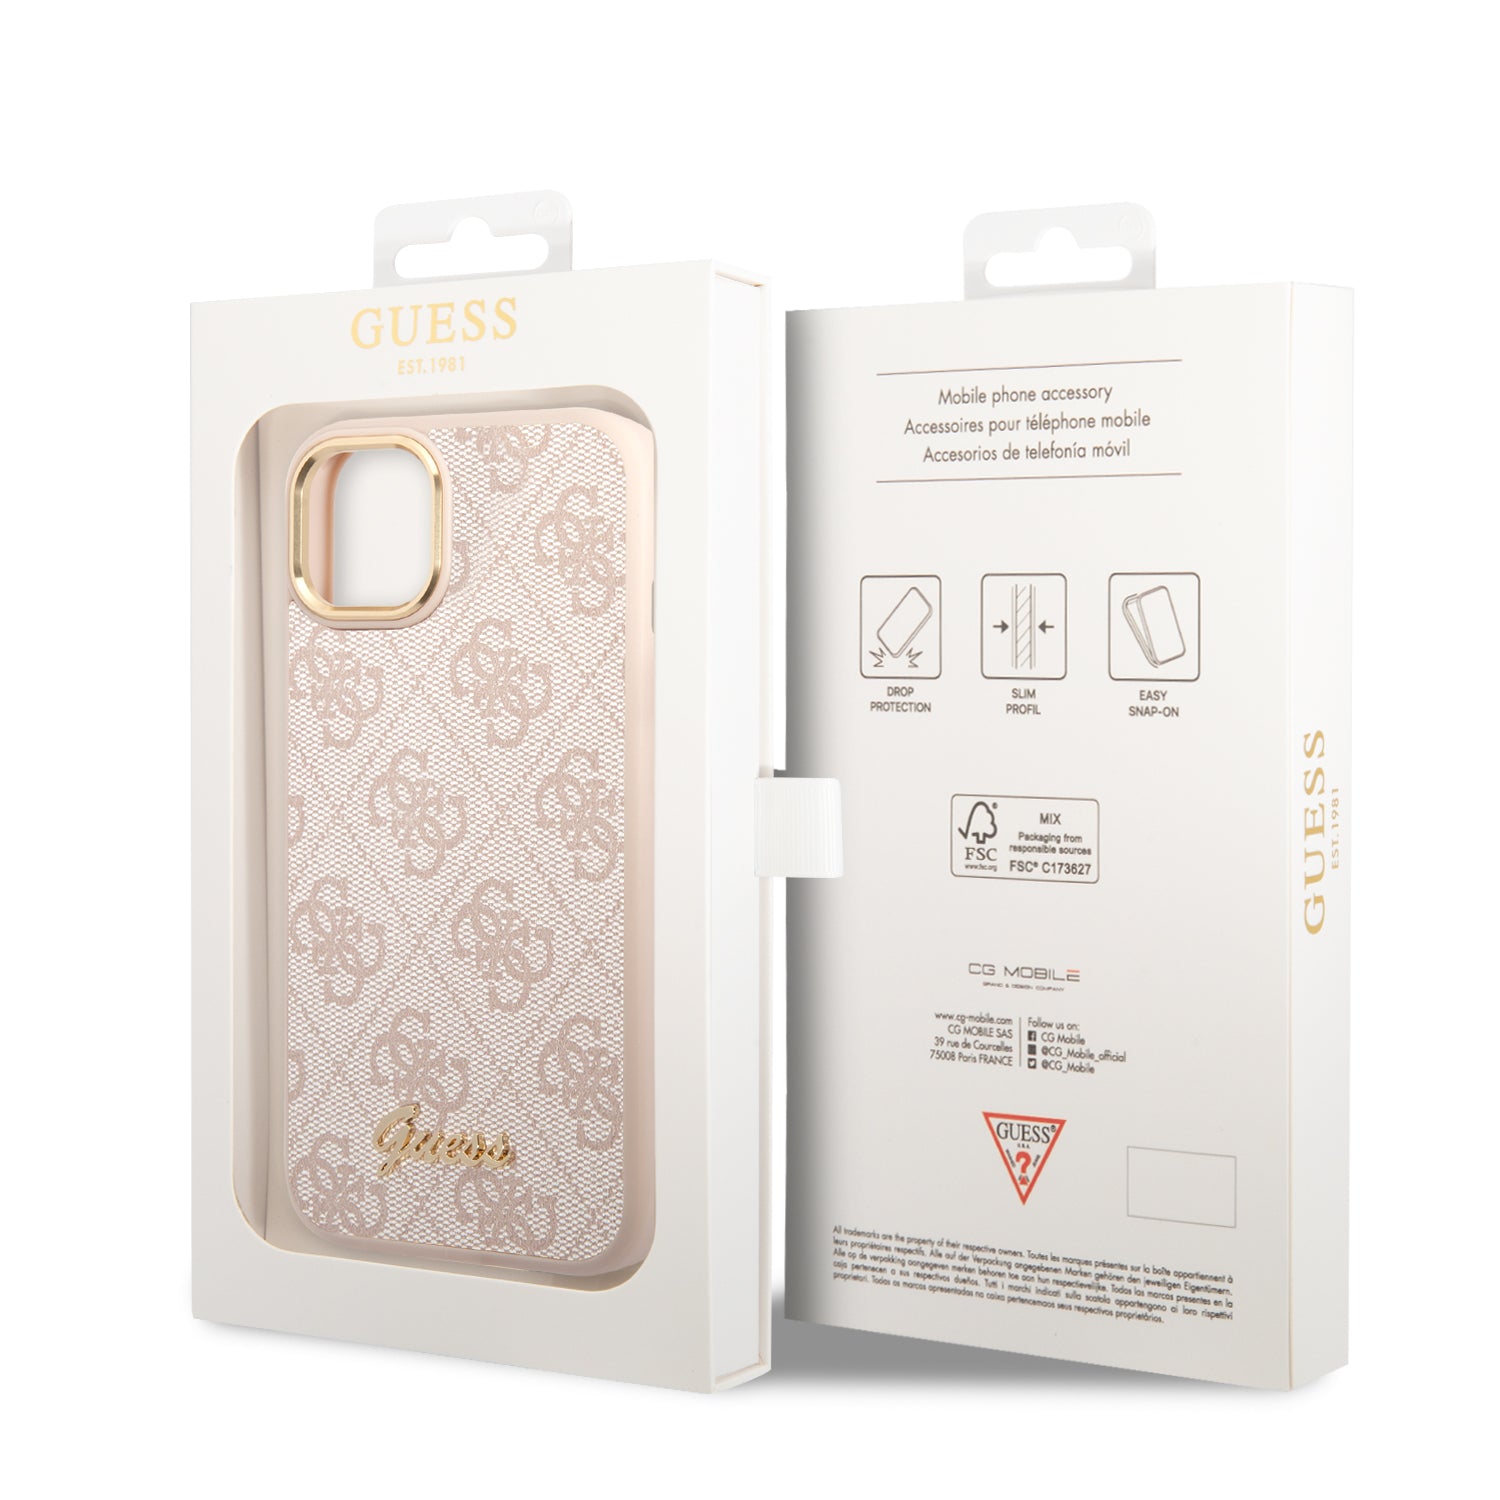 Shop CG Mobile Guess PU Leather Case with 4G Metal Logo